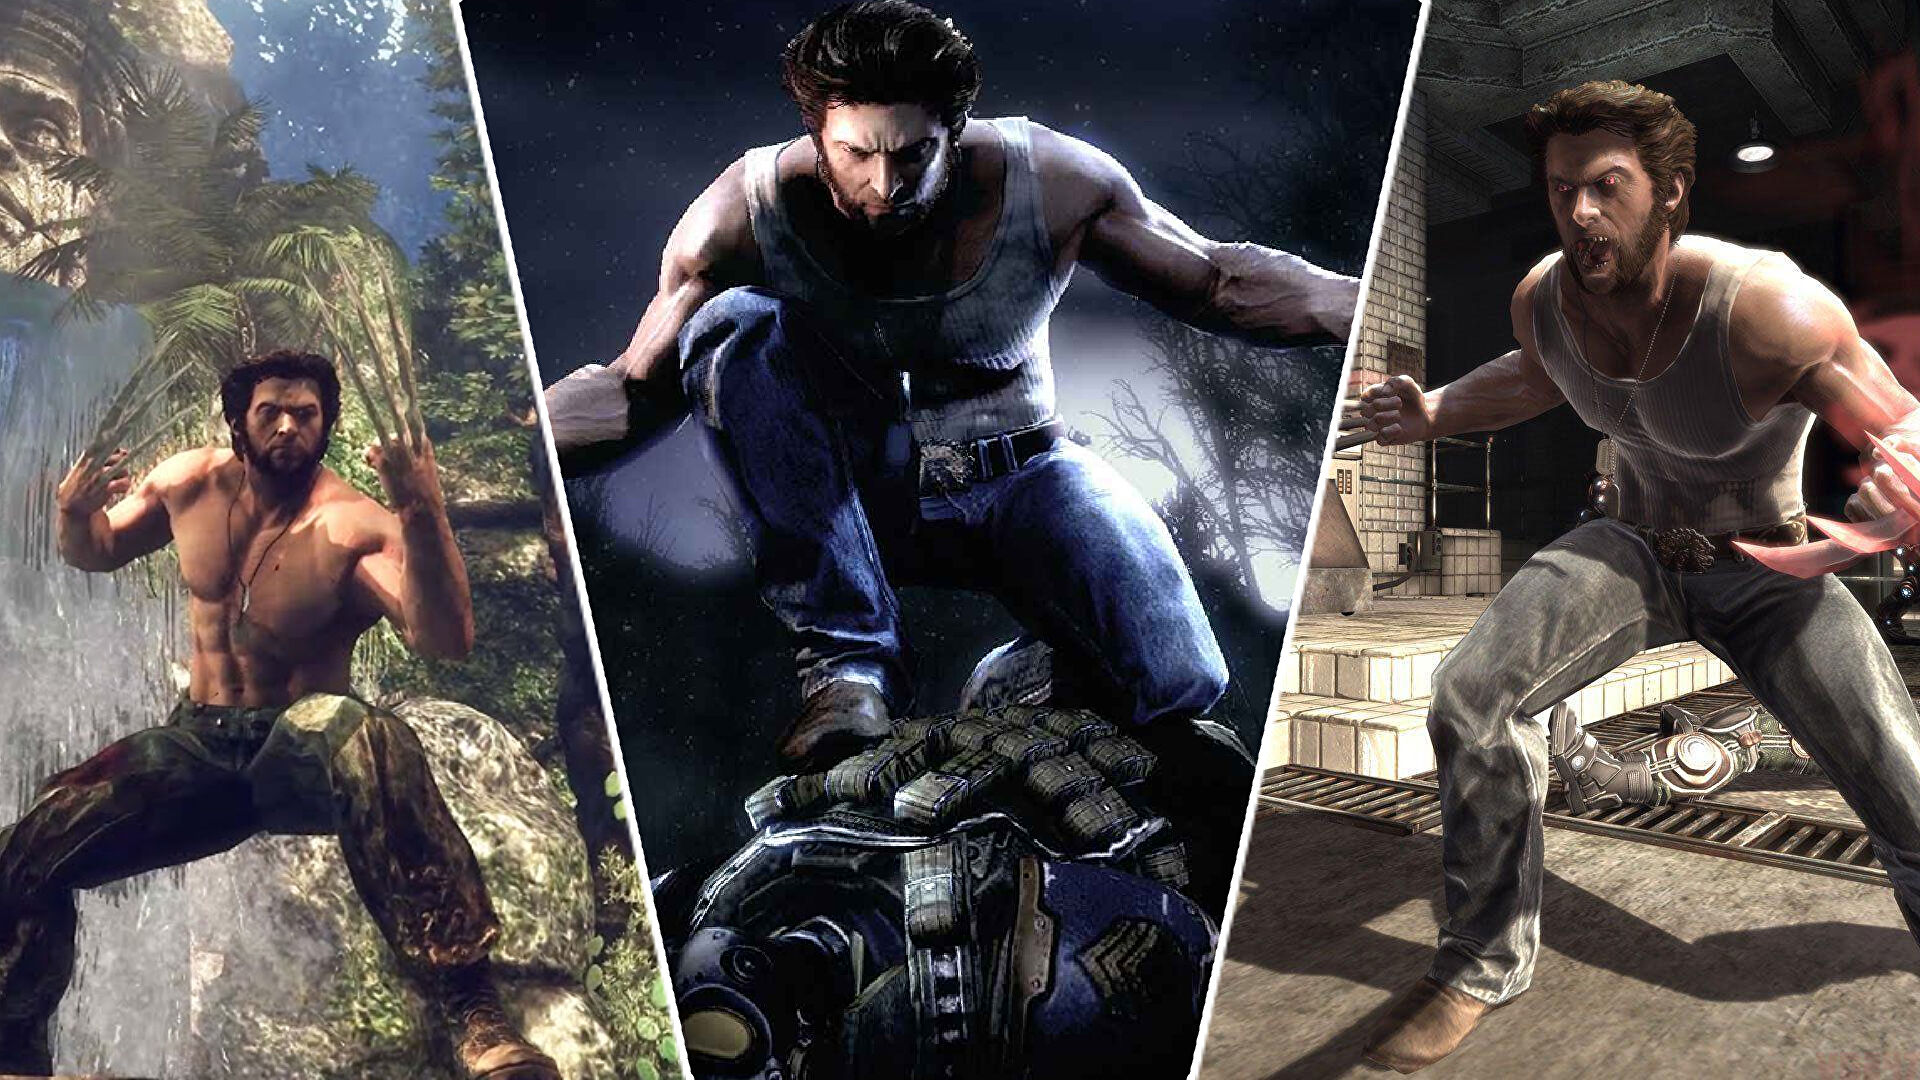 With Jackman’s Wolverine coming back to movies, it’s the ideal time to play the best Wolverine game